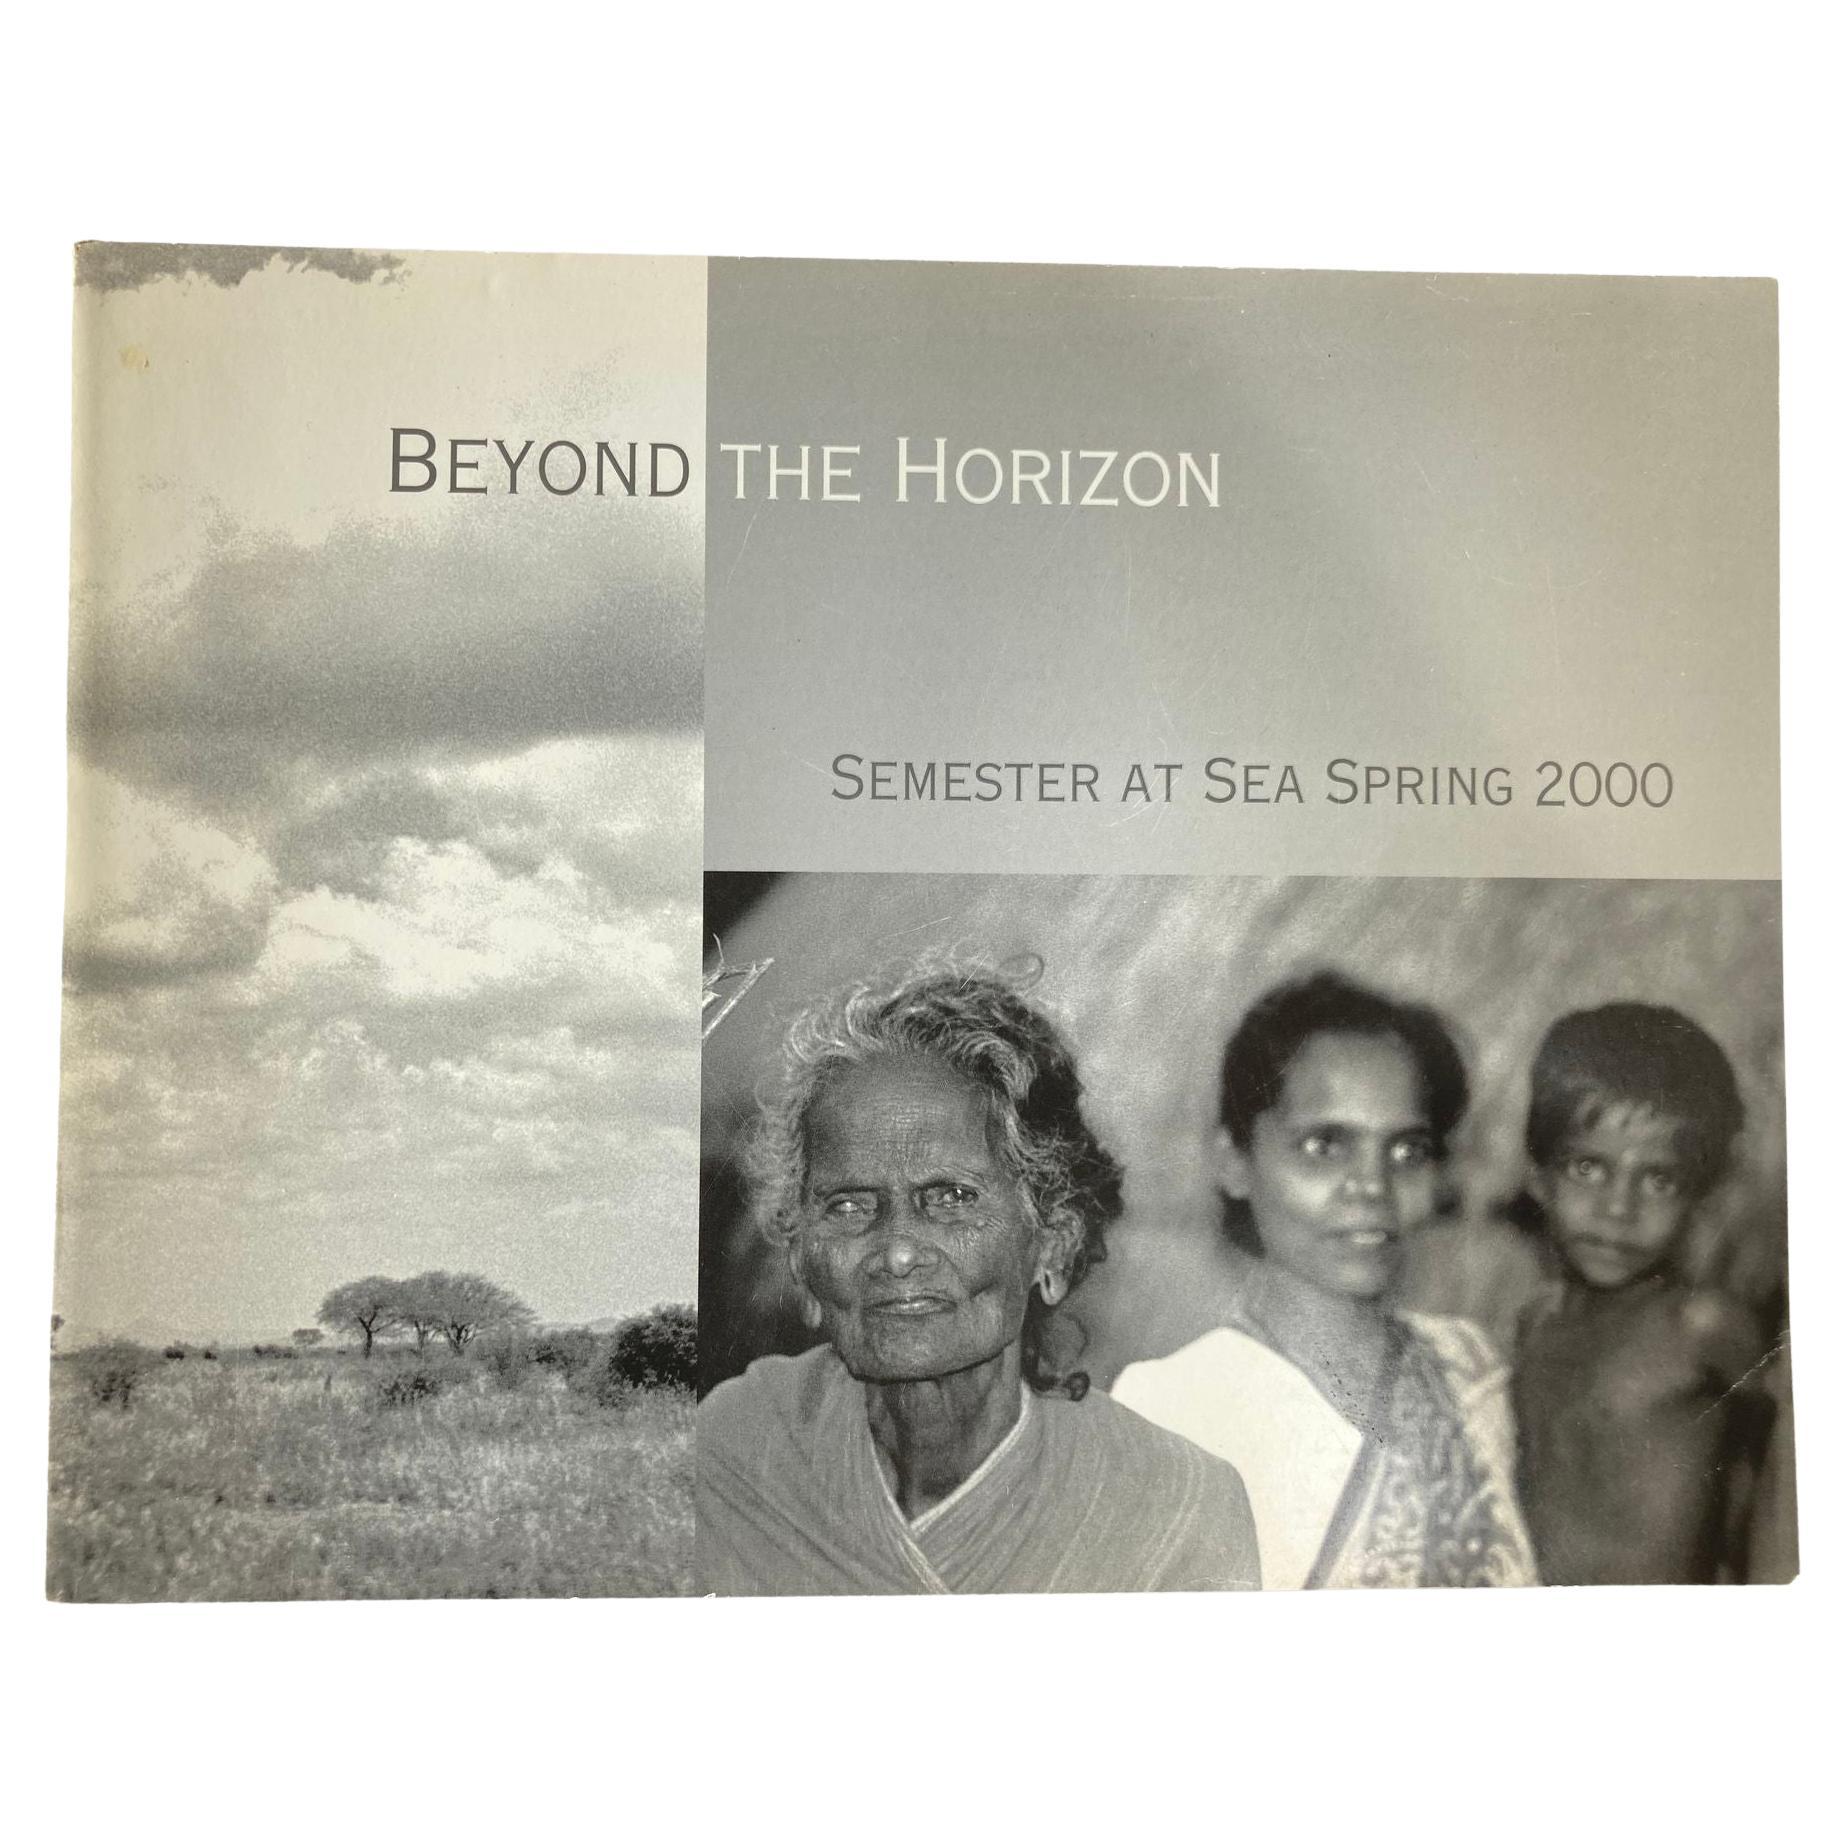 Beyond the Horizon Semester at Sea Around-the-world Voyage Dreams Fulfilled Book For Sale